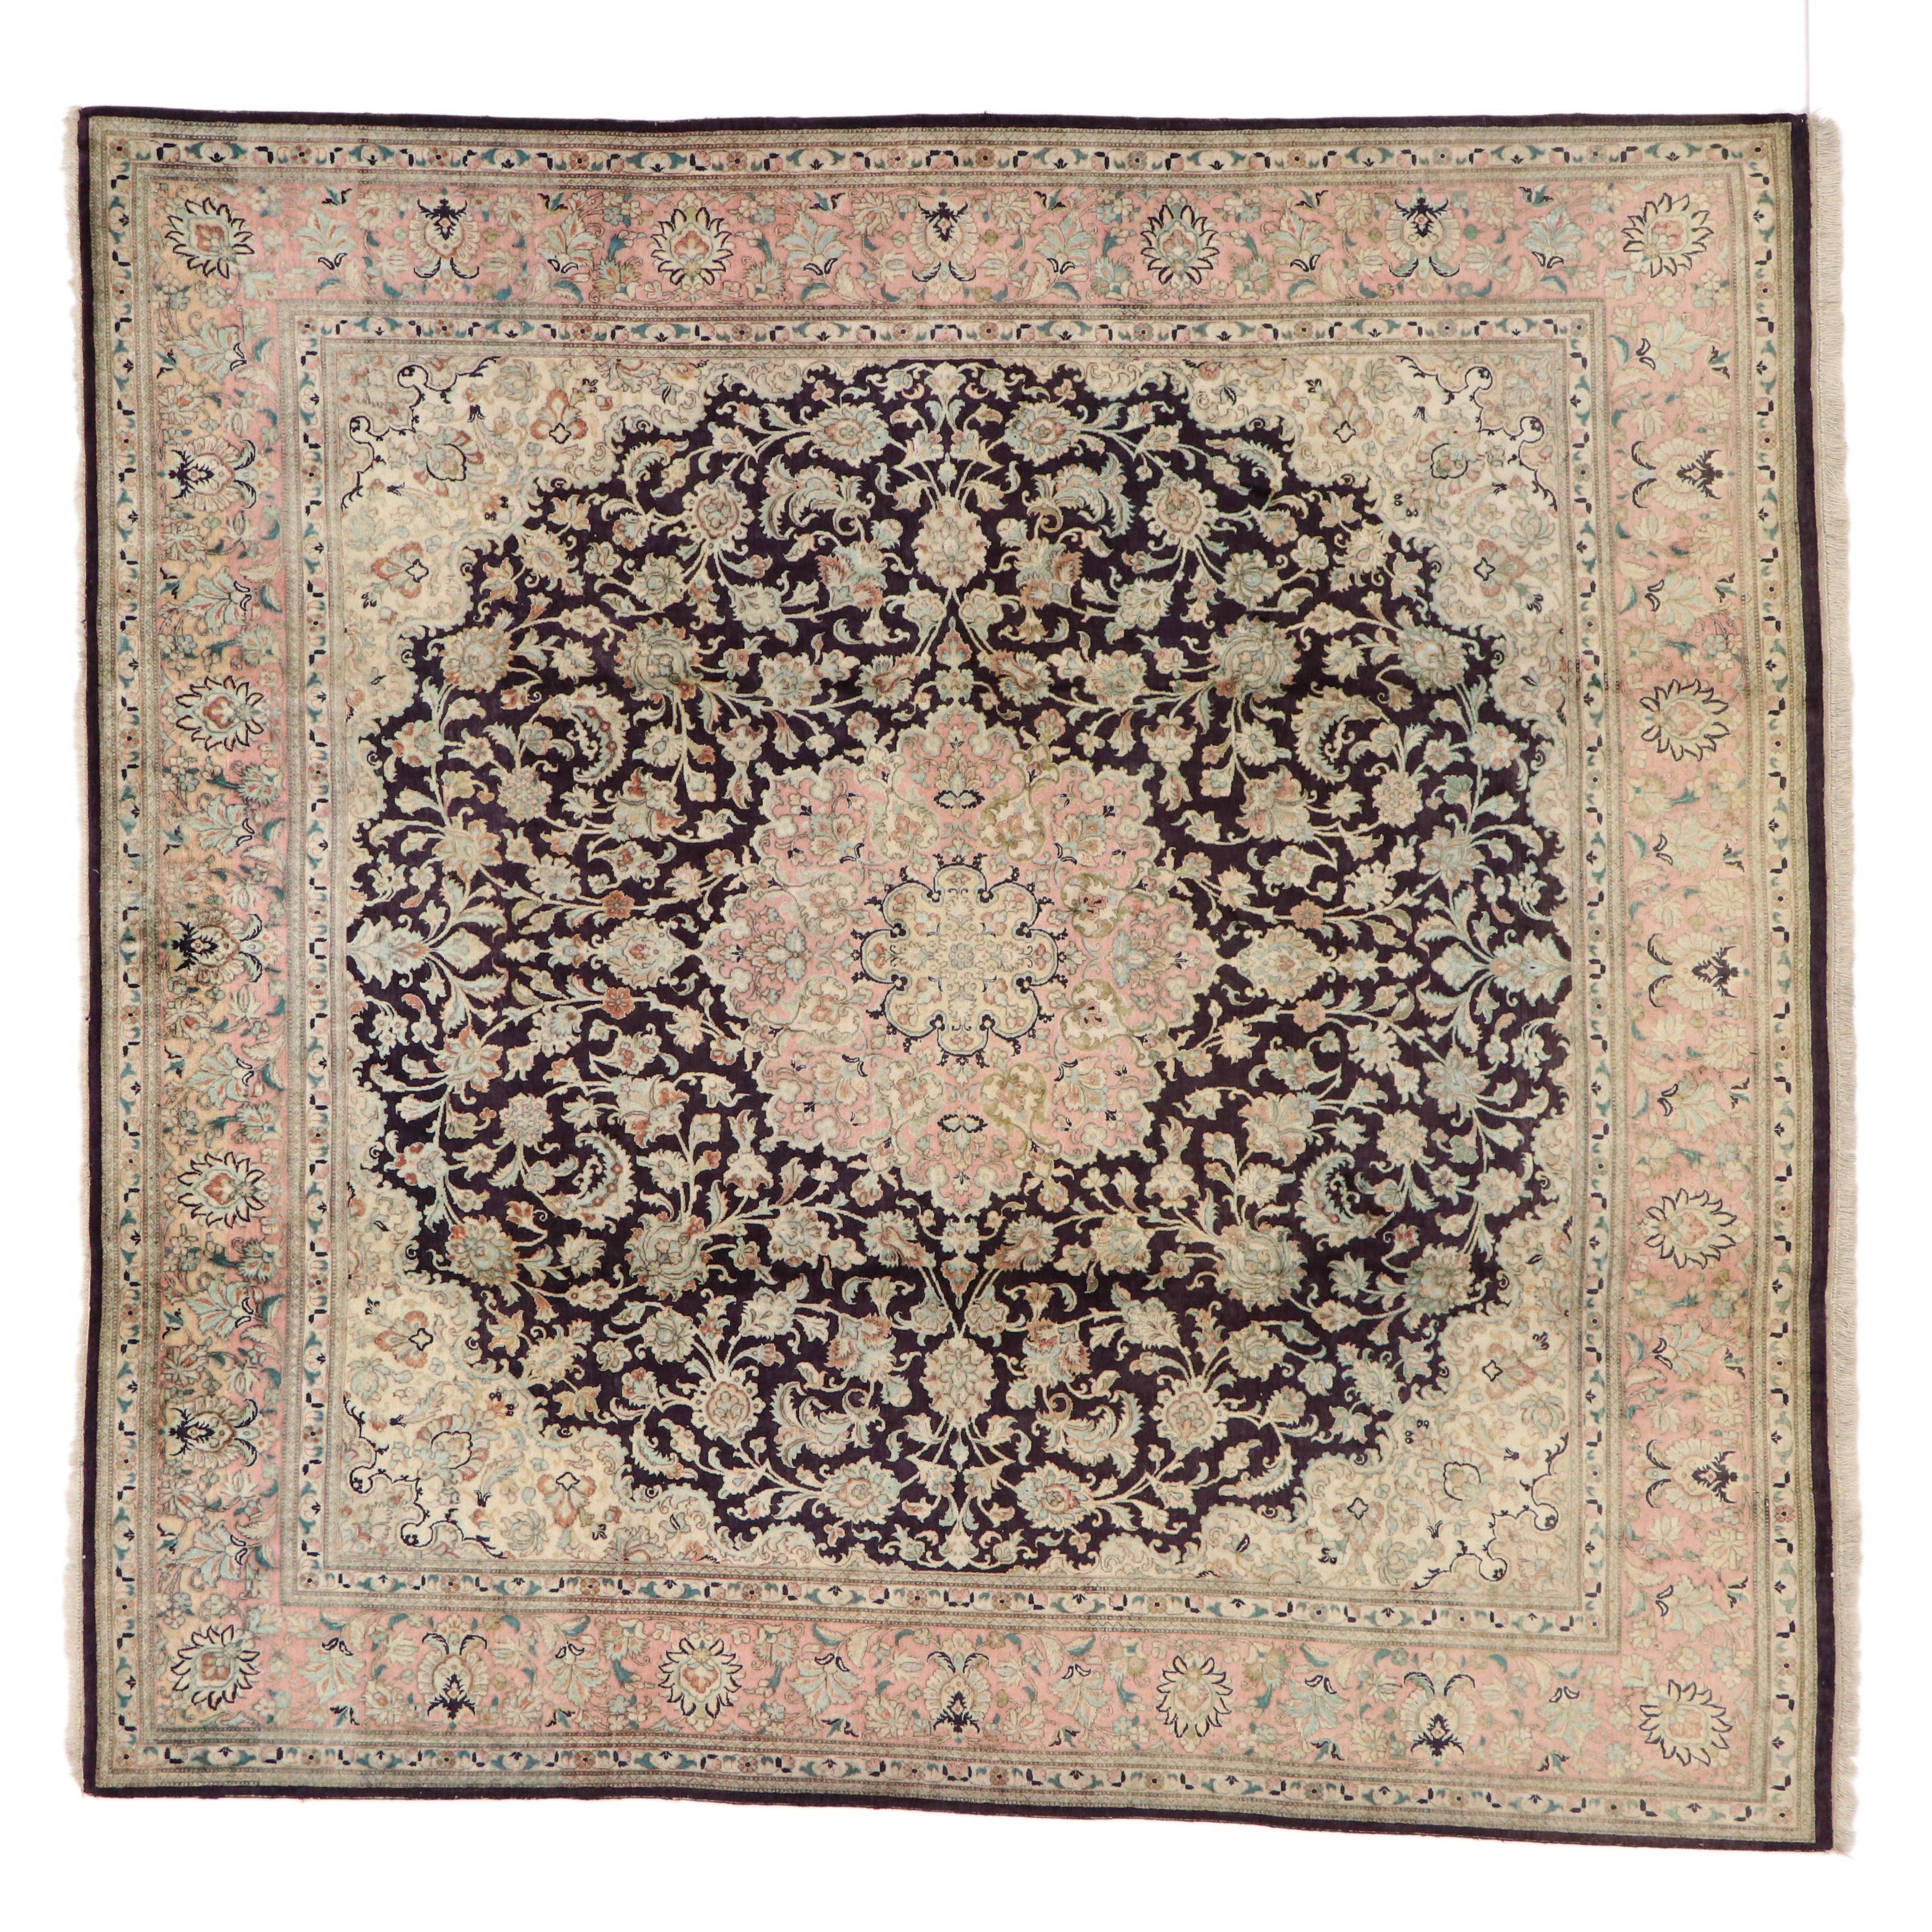 74893, Vintage Persian Silk Qum Square Rug with French Provincial Style 06'08 x 06'09. This stunning Persian silk Qum rug with traditional style in light colors bears a remarkable air of chic sophistication. Features a centre medallion with gorgeous